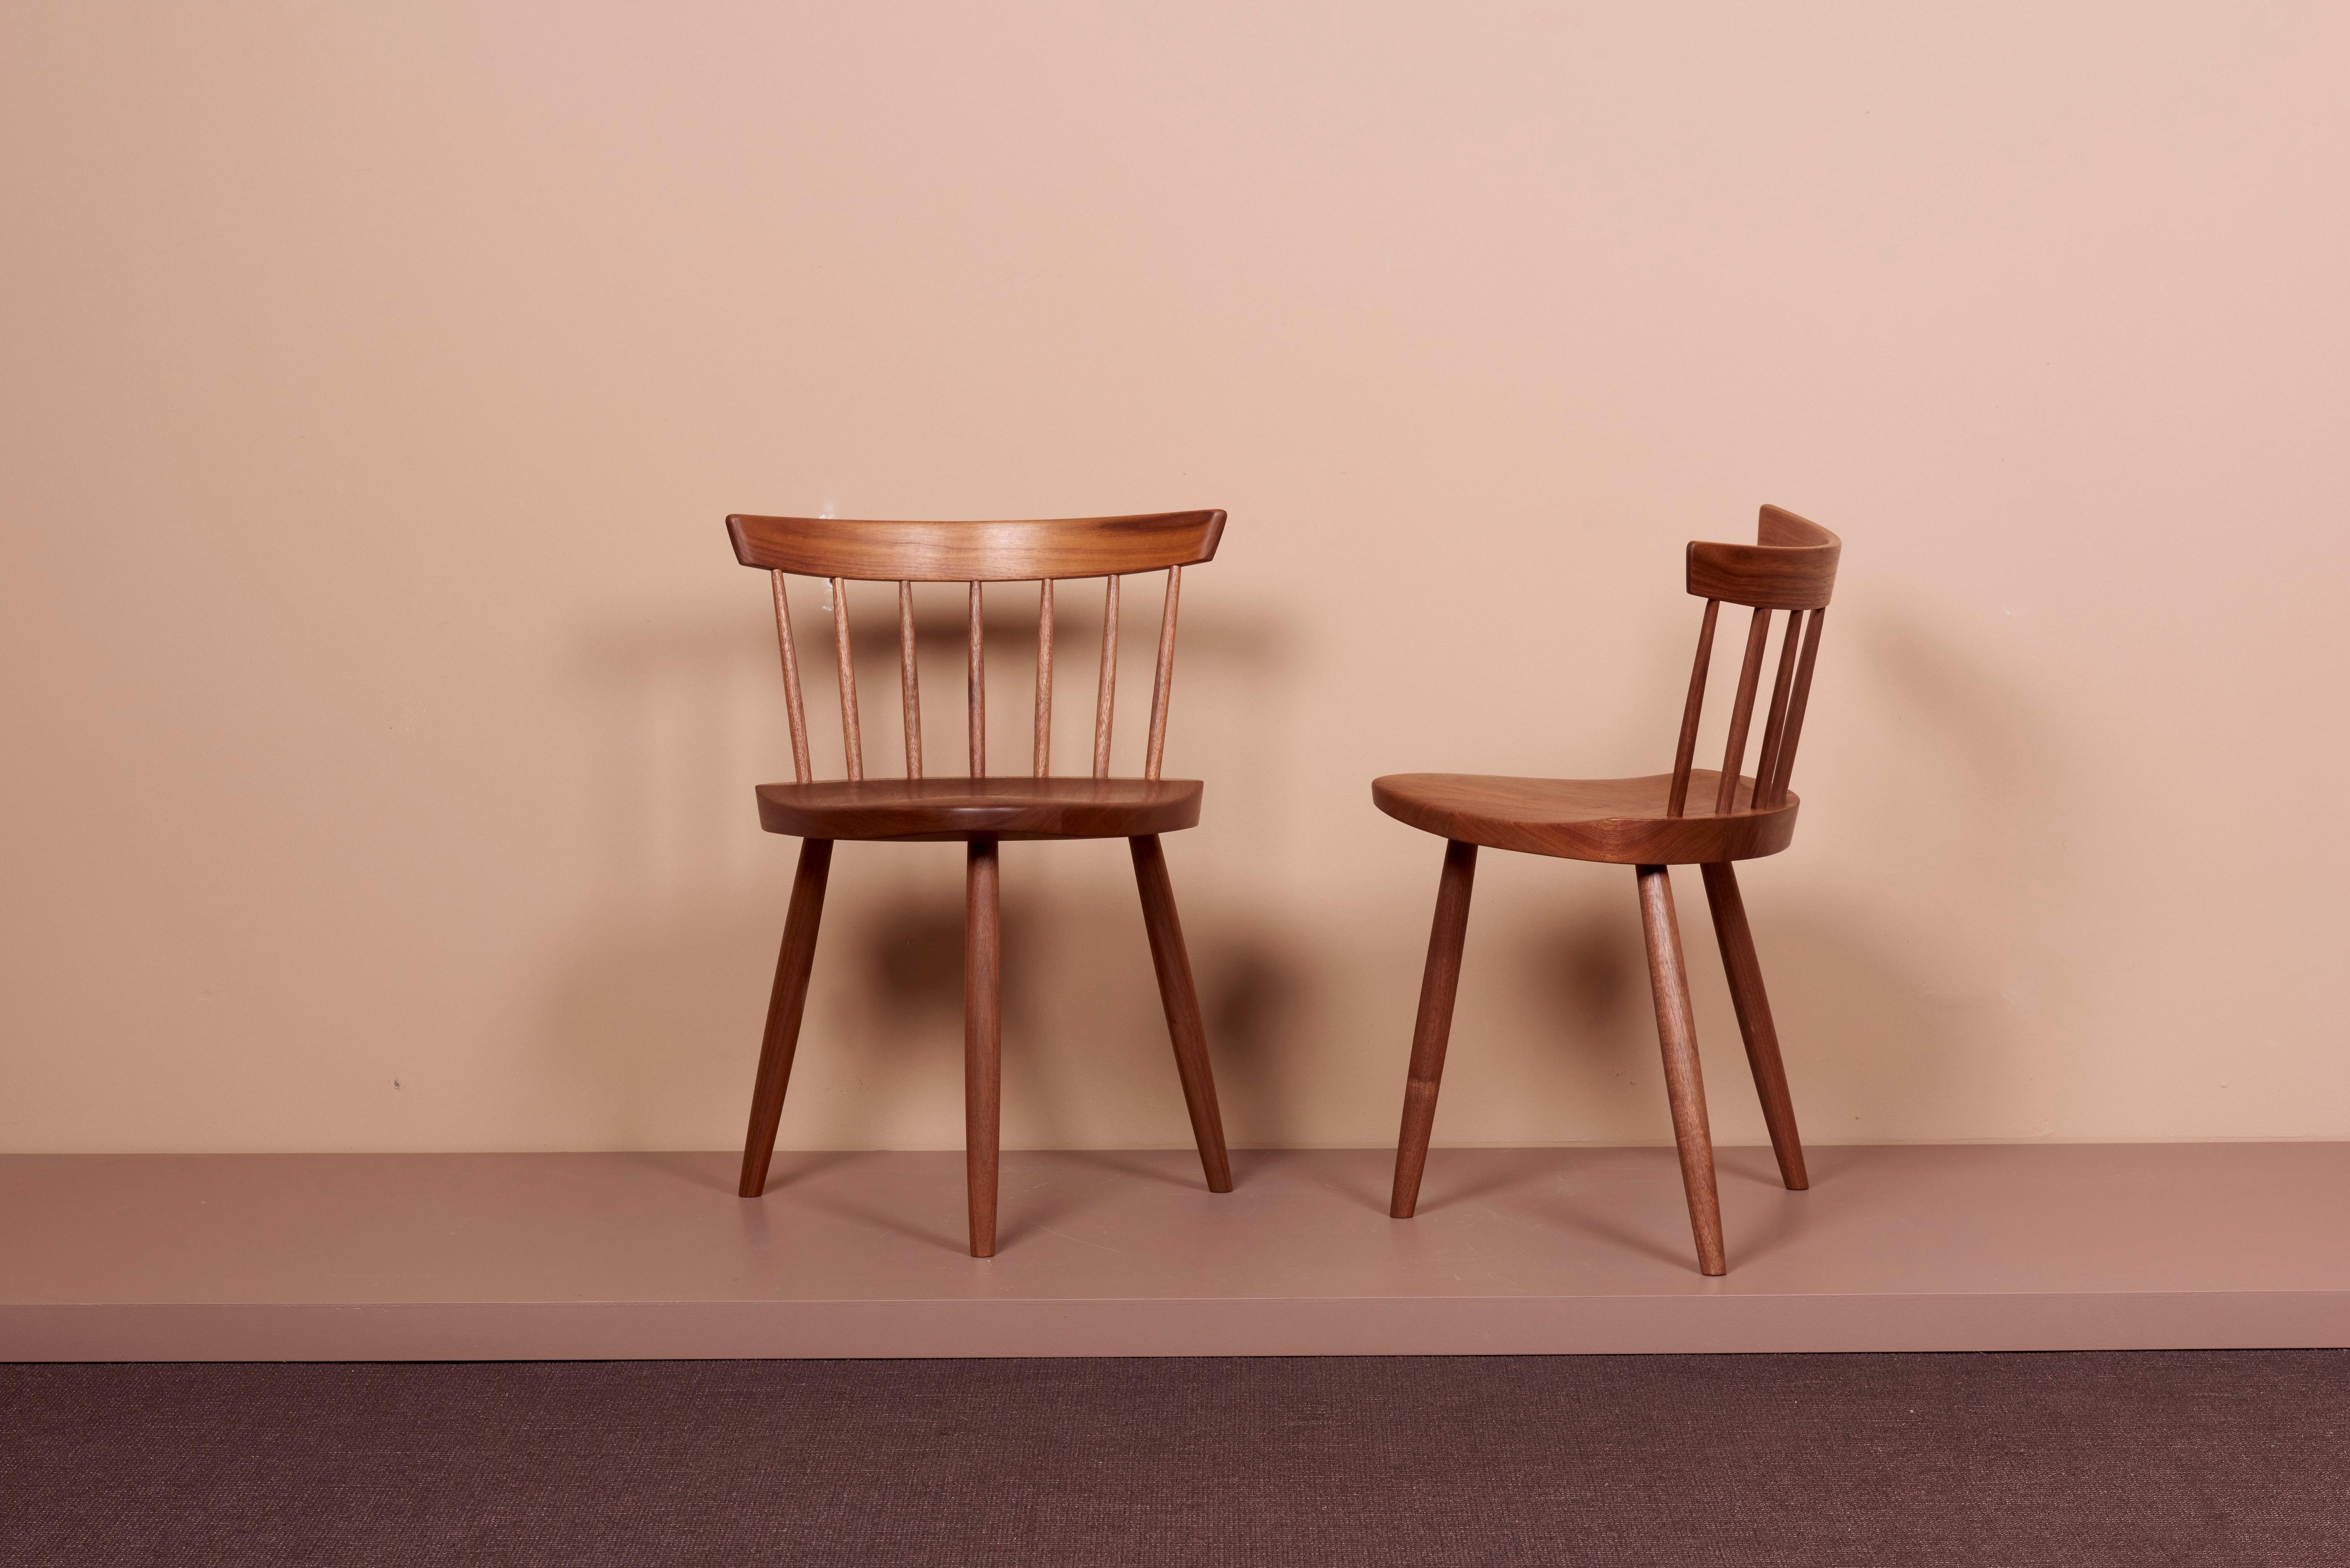 Pair of Mira Chairs by Mira Nakashima based on a design by George Nakashima. The chairs are in black walnut and can be signed. Production lead time is around 18 months. Please get in touch with us for further information. 
  